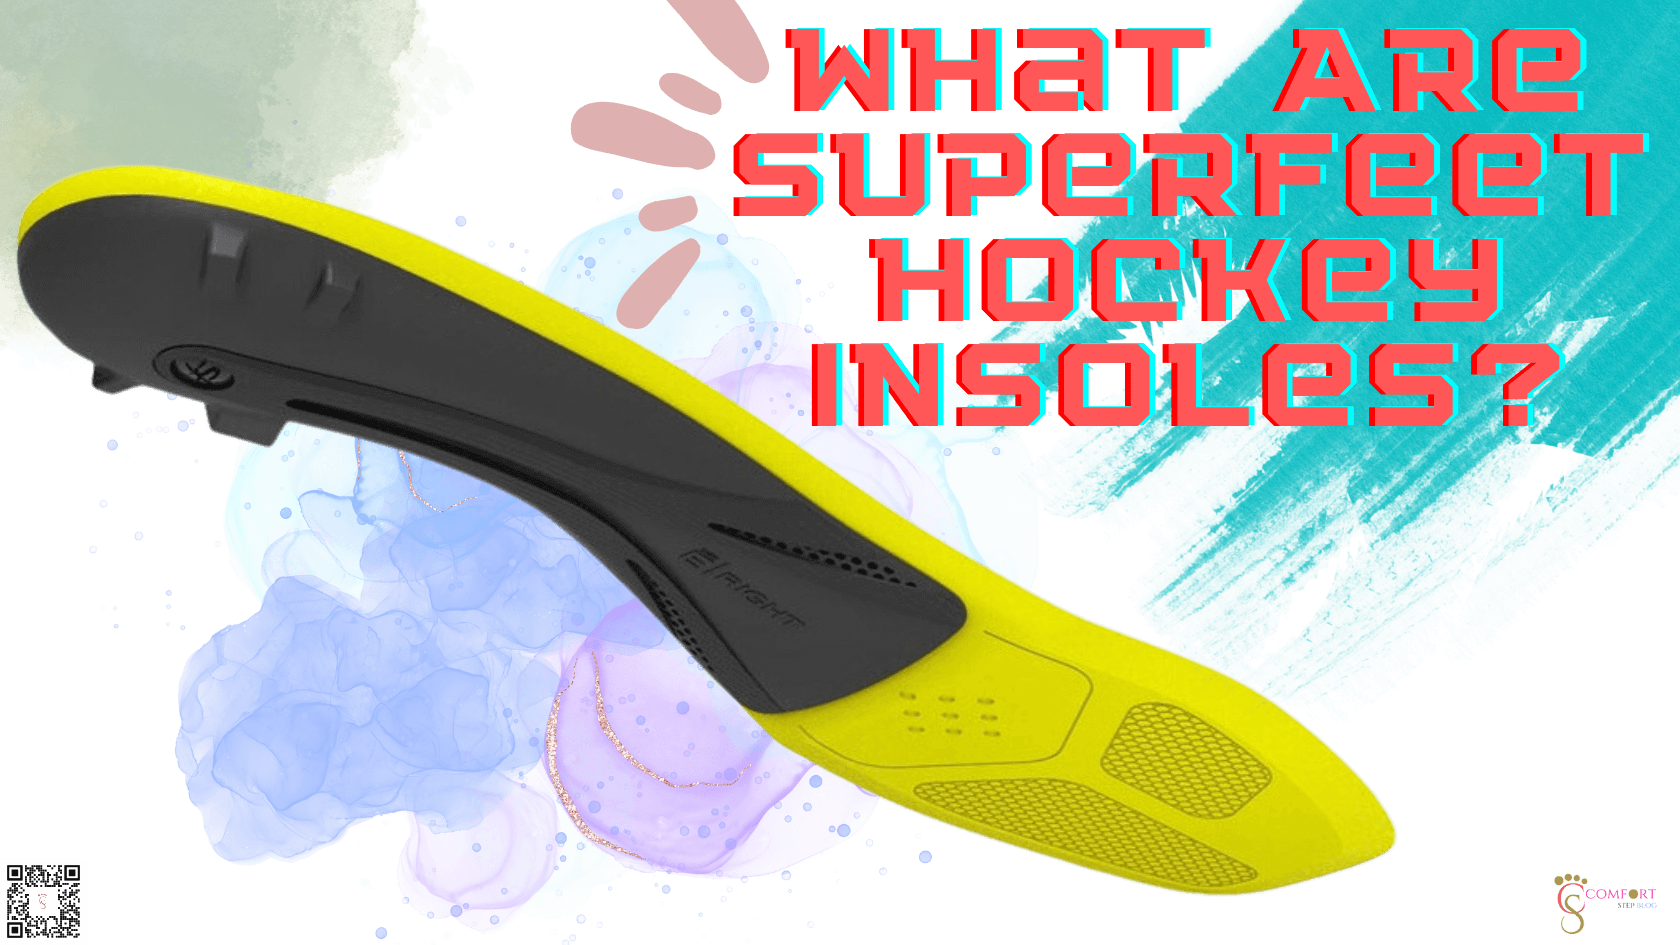 What Are Superfeet Hockey Insoles?